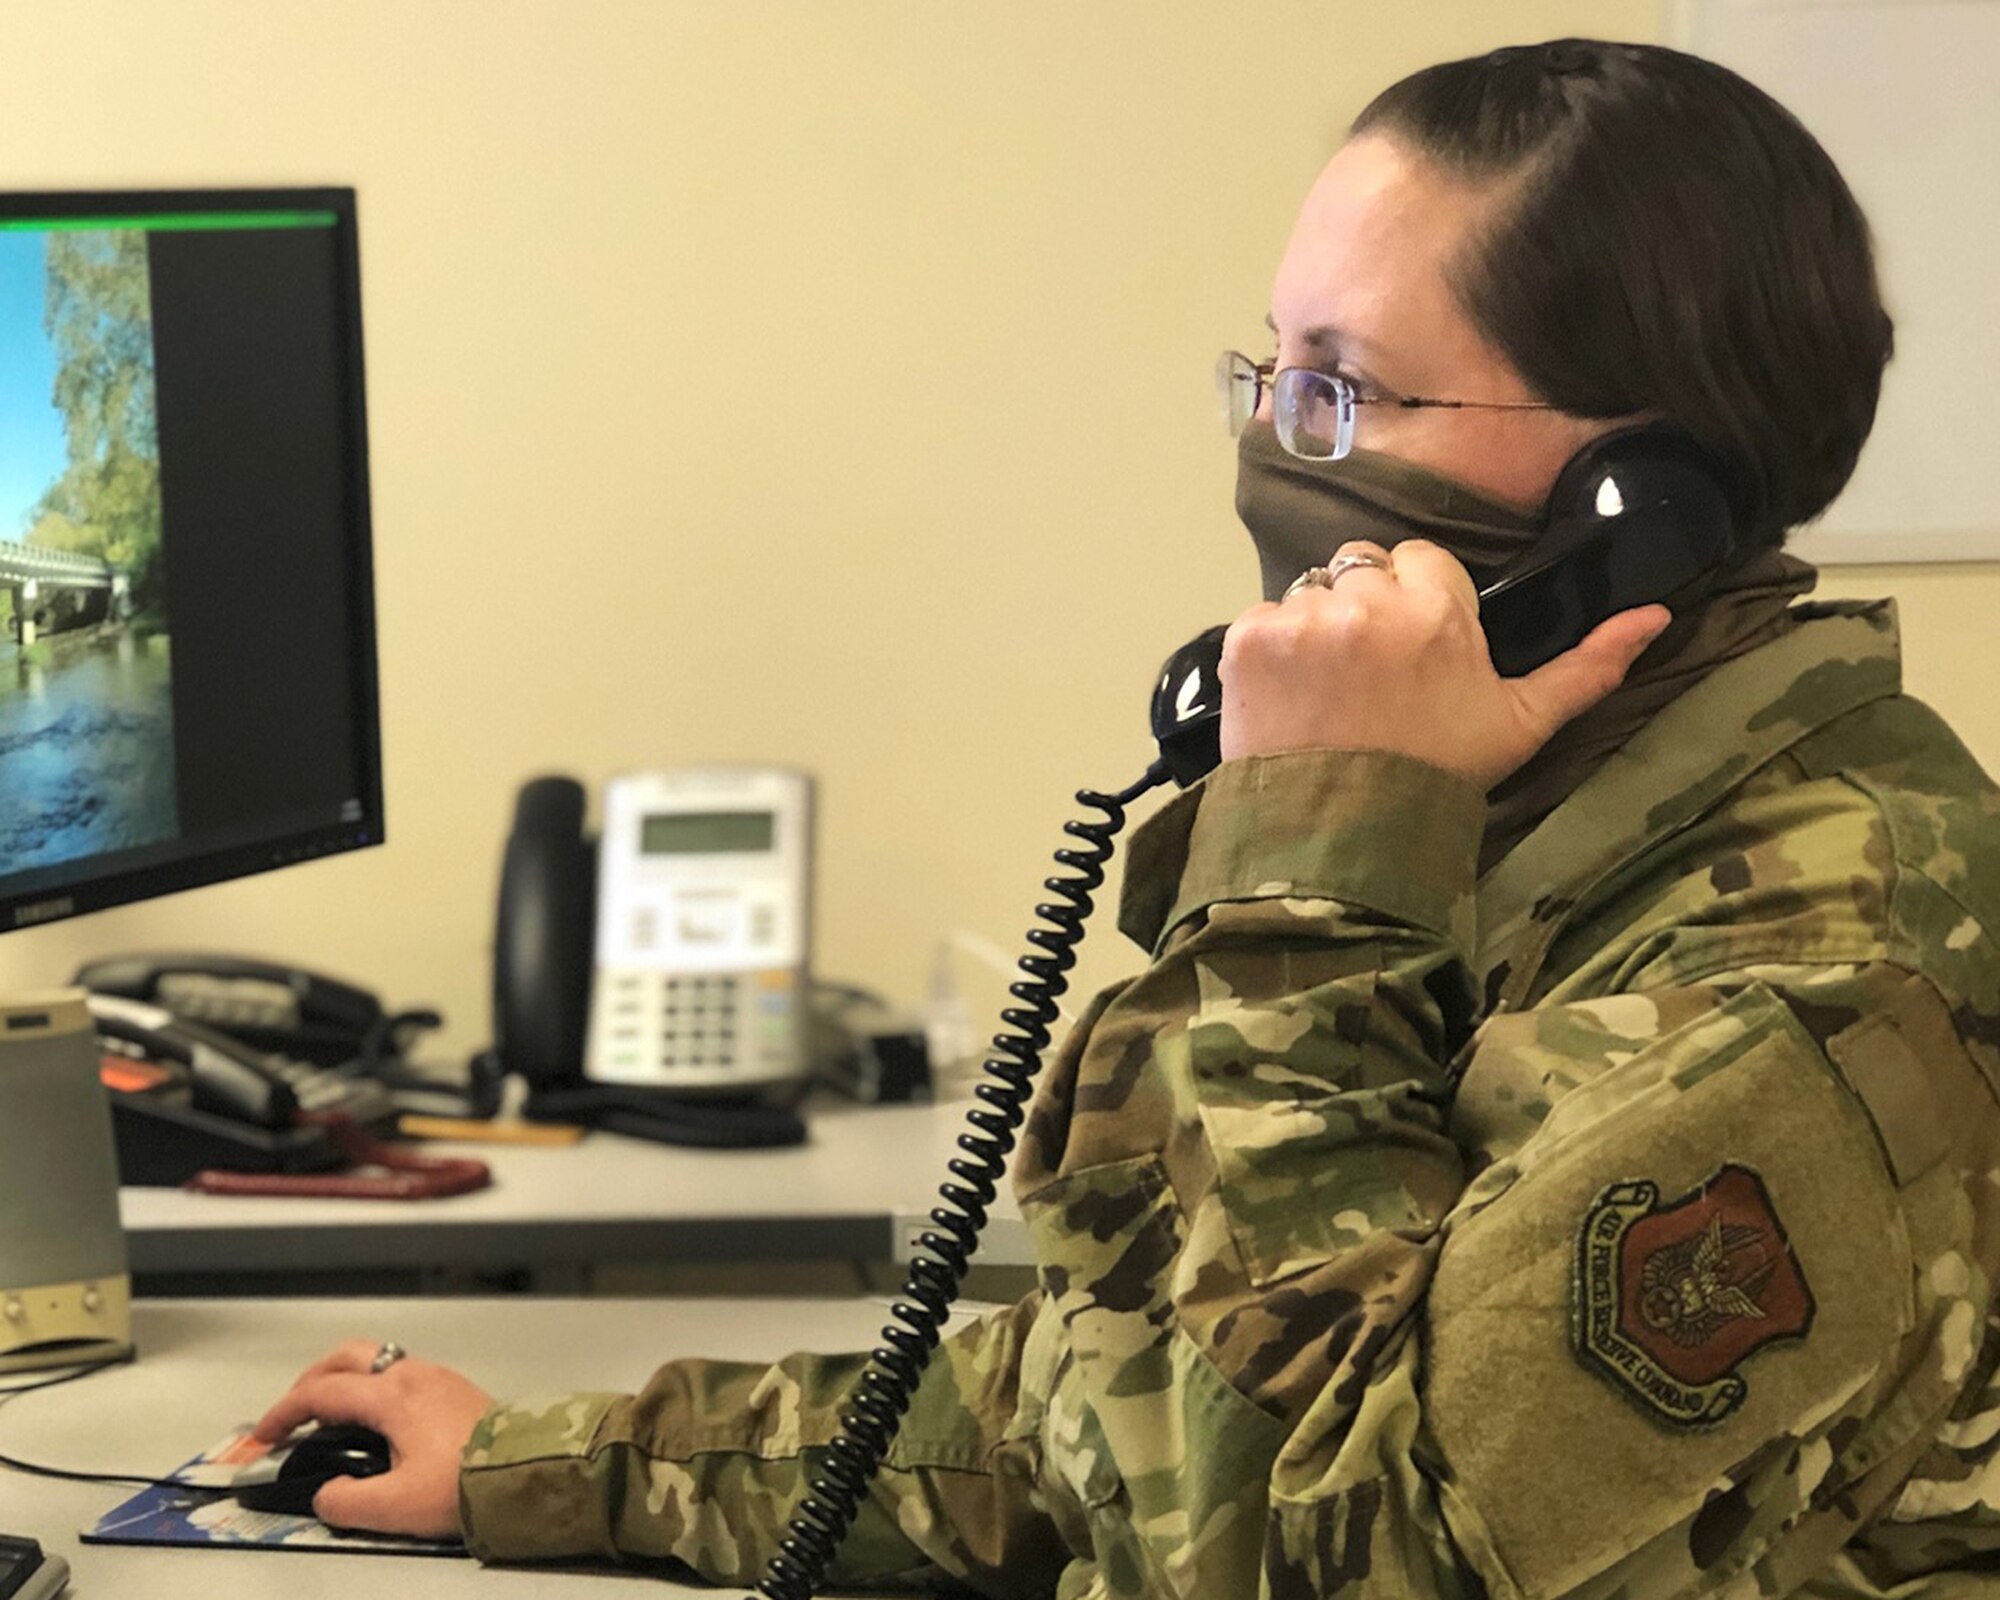 Master Sgt. Amber Church, 445th Command Post superintendent, is deemed mission essential and must report in to work during the COVID-19 pandemic. (U.S. Air Force photo/Airman 1st Class Erin Zimpfer)